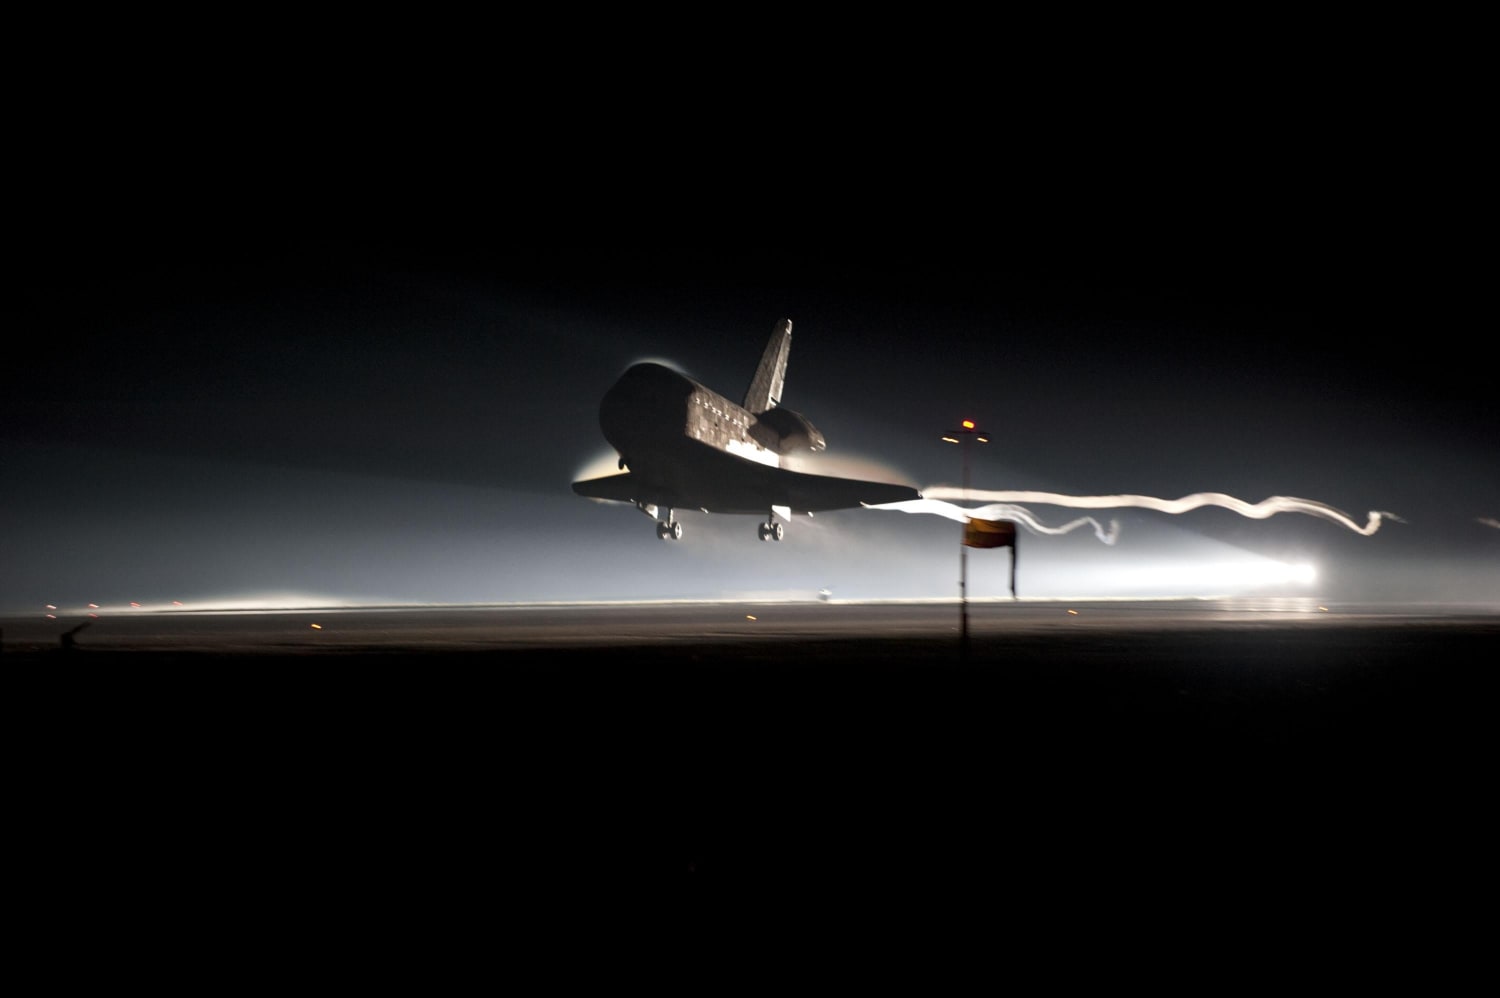 Atlantis on short final to Kennedy Space Center's Shuttle Landing Facility after a 200-orbit 5,284,862-mile flight to conclude the final mission of the Space Shuttle Program (STS-135), July 21, 2011